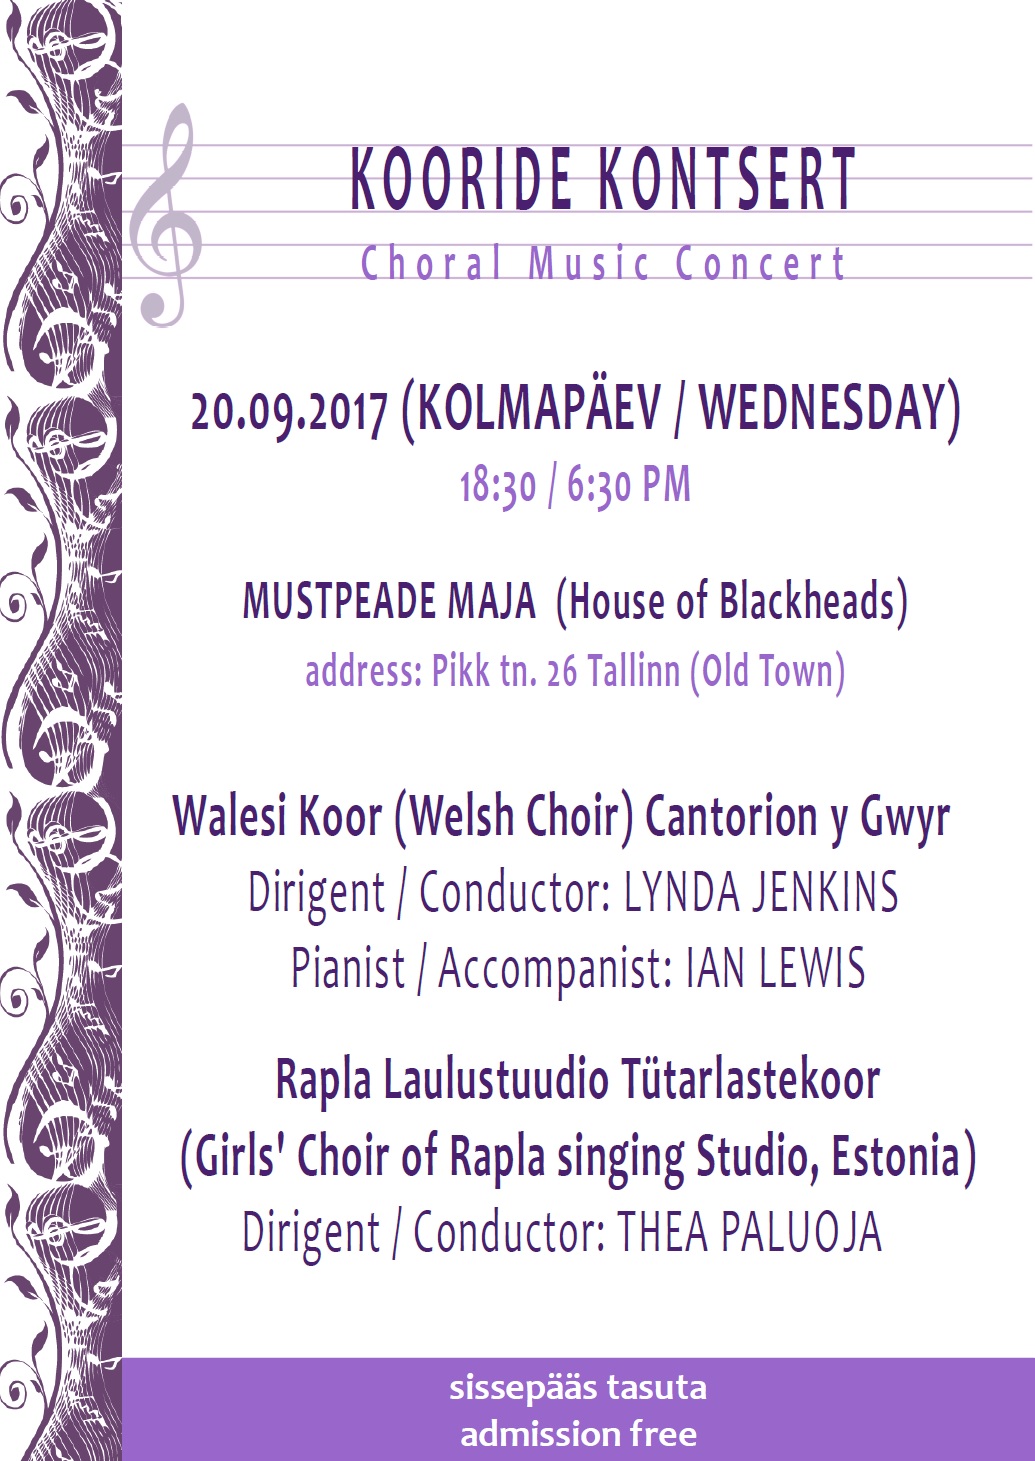 CHORAL MUSIC CONCERT